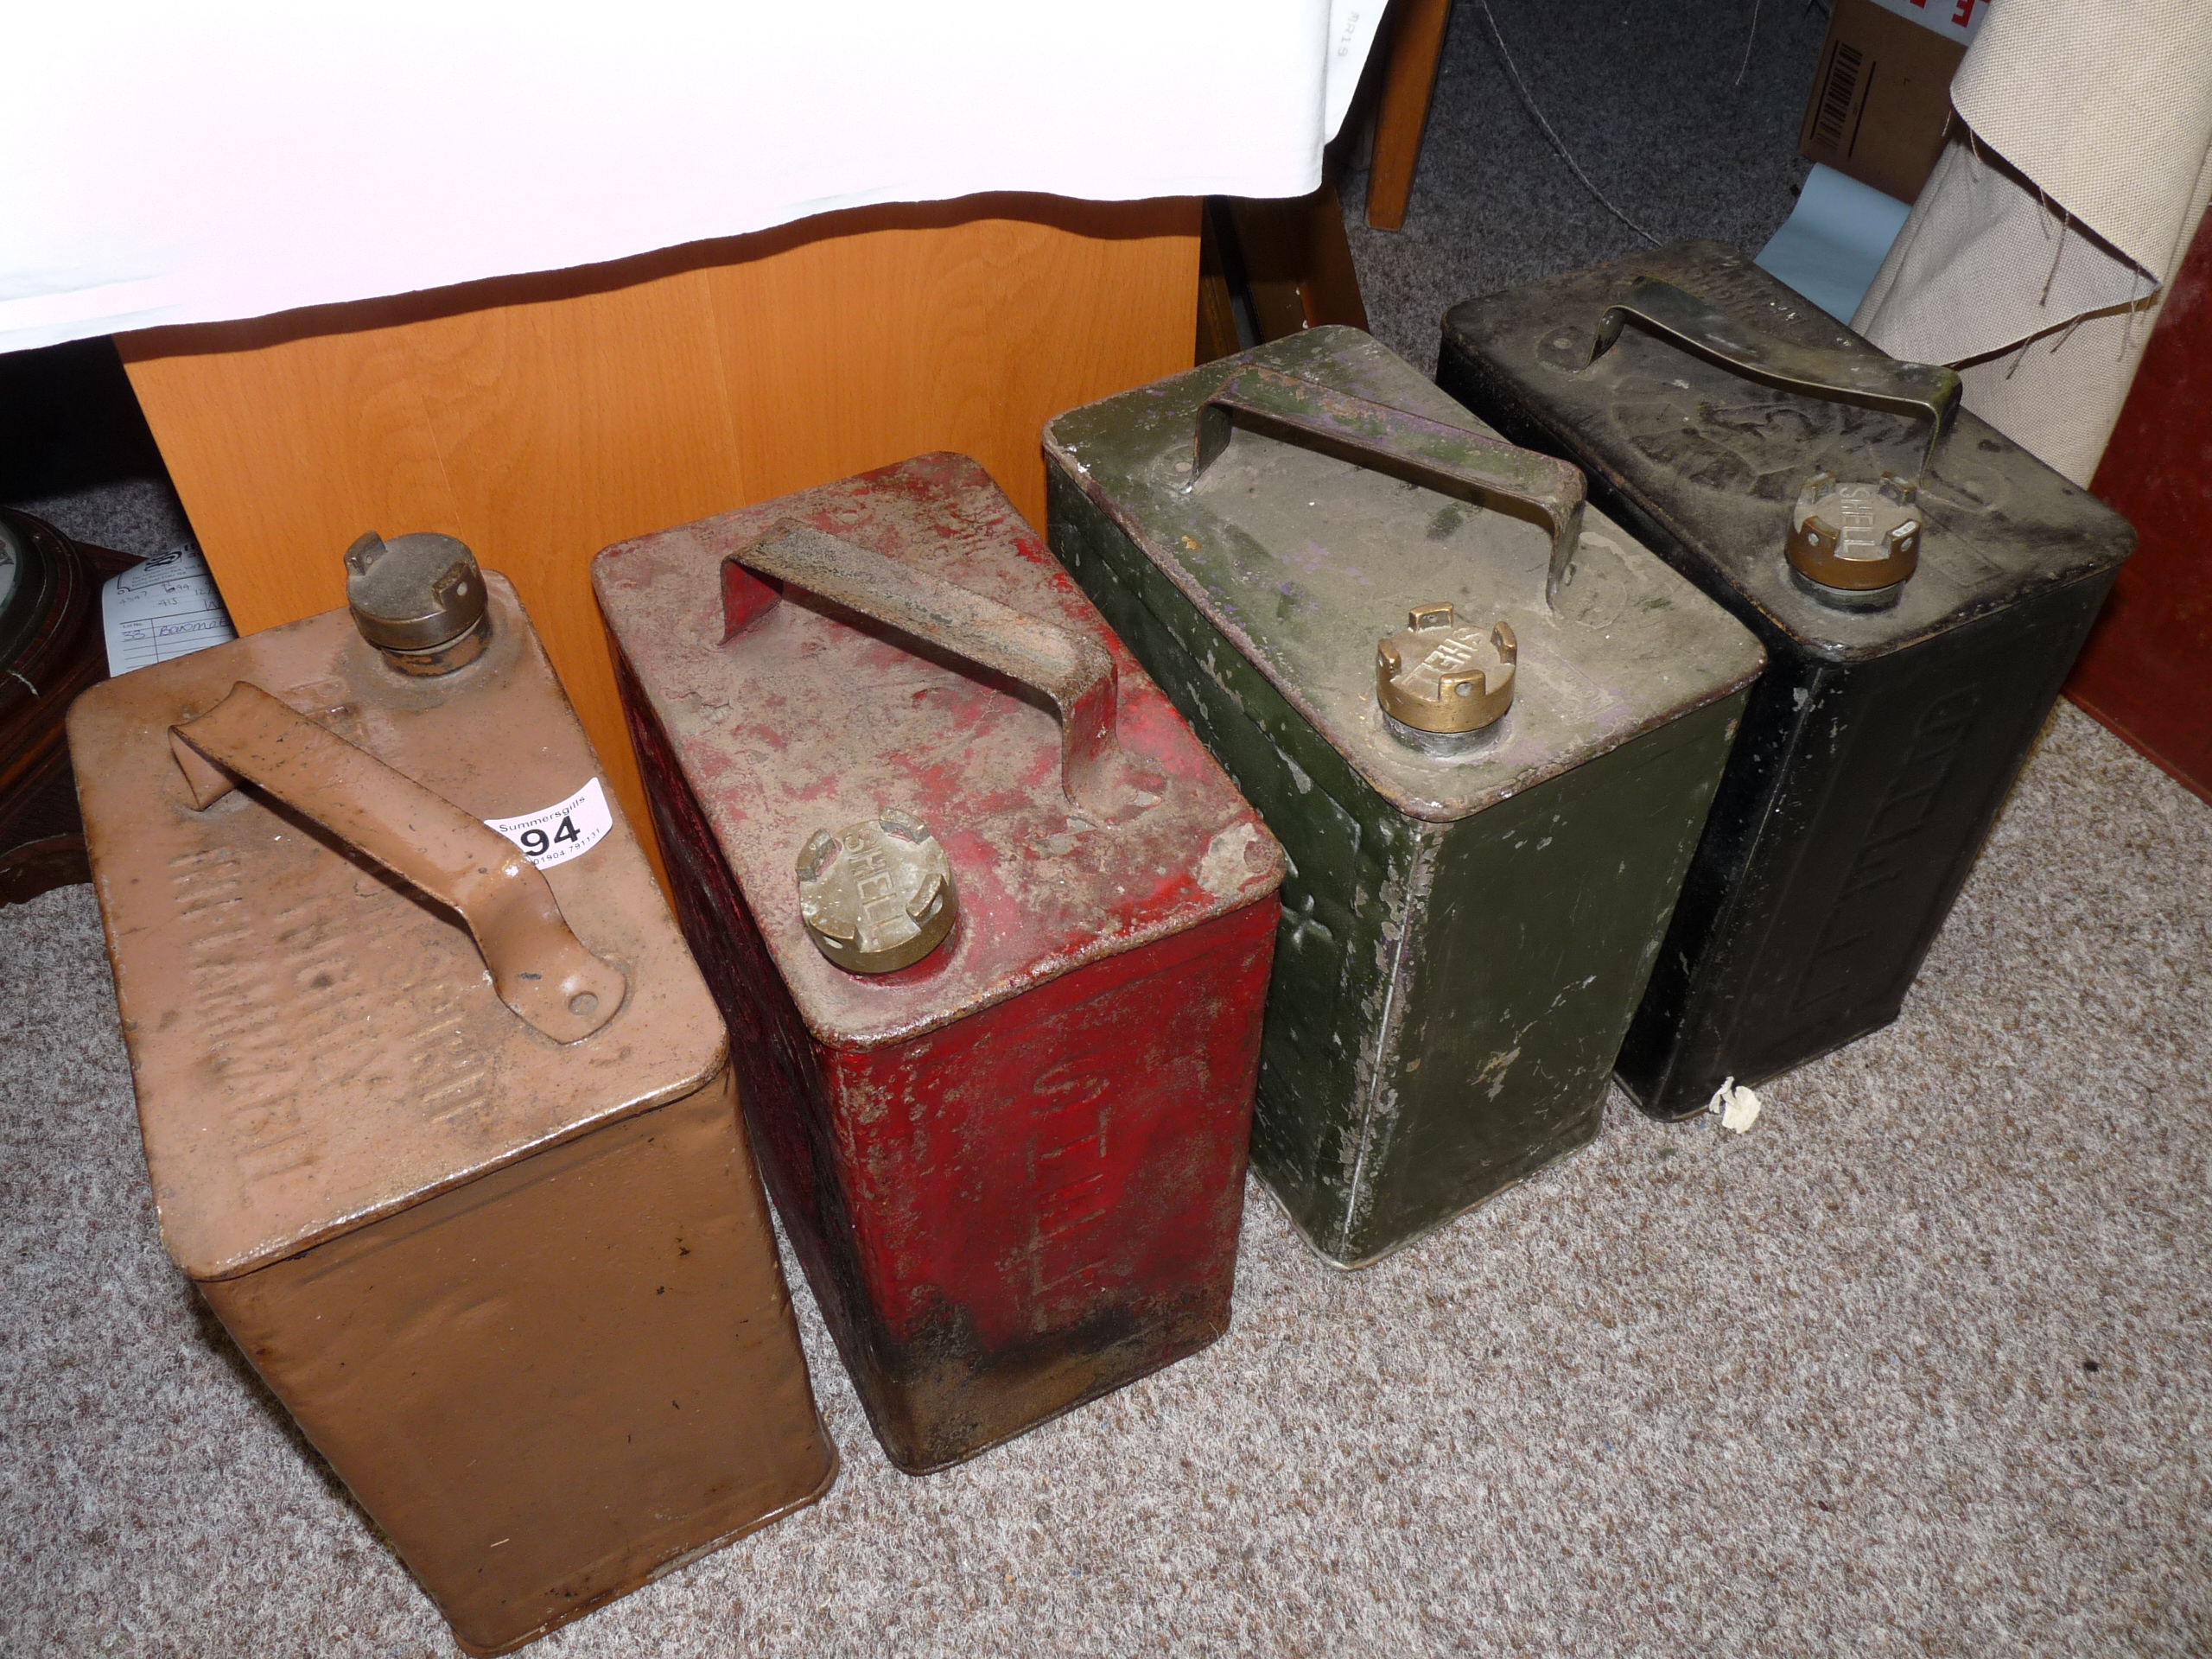 Set of four Shell oil/petrol cans